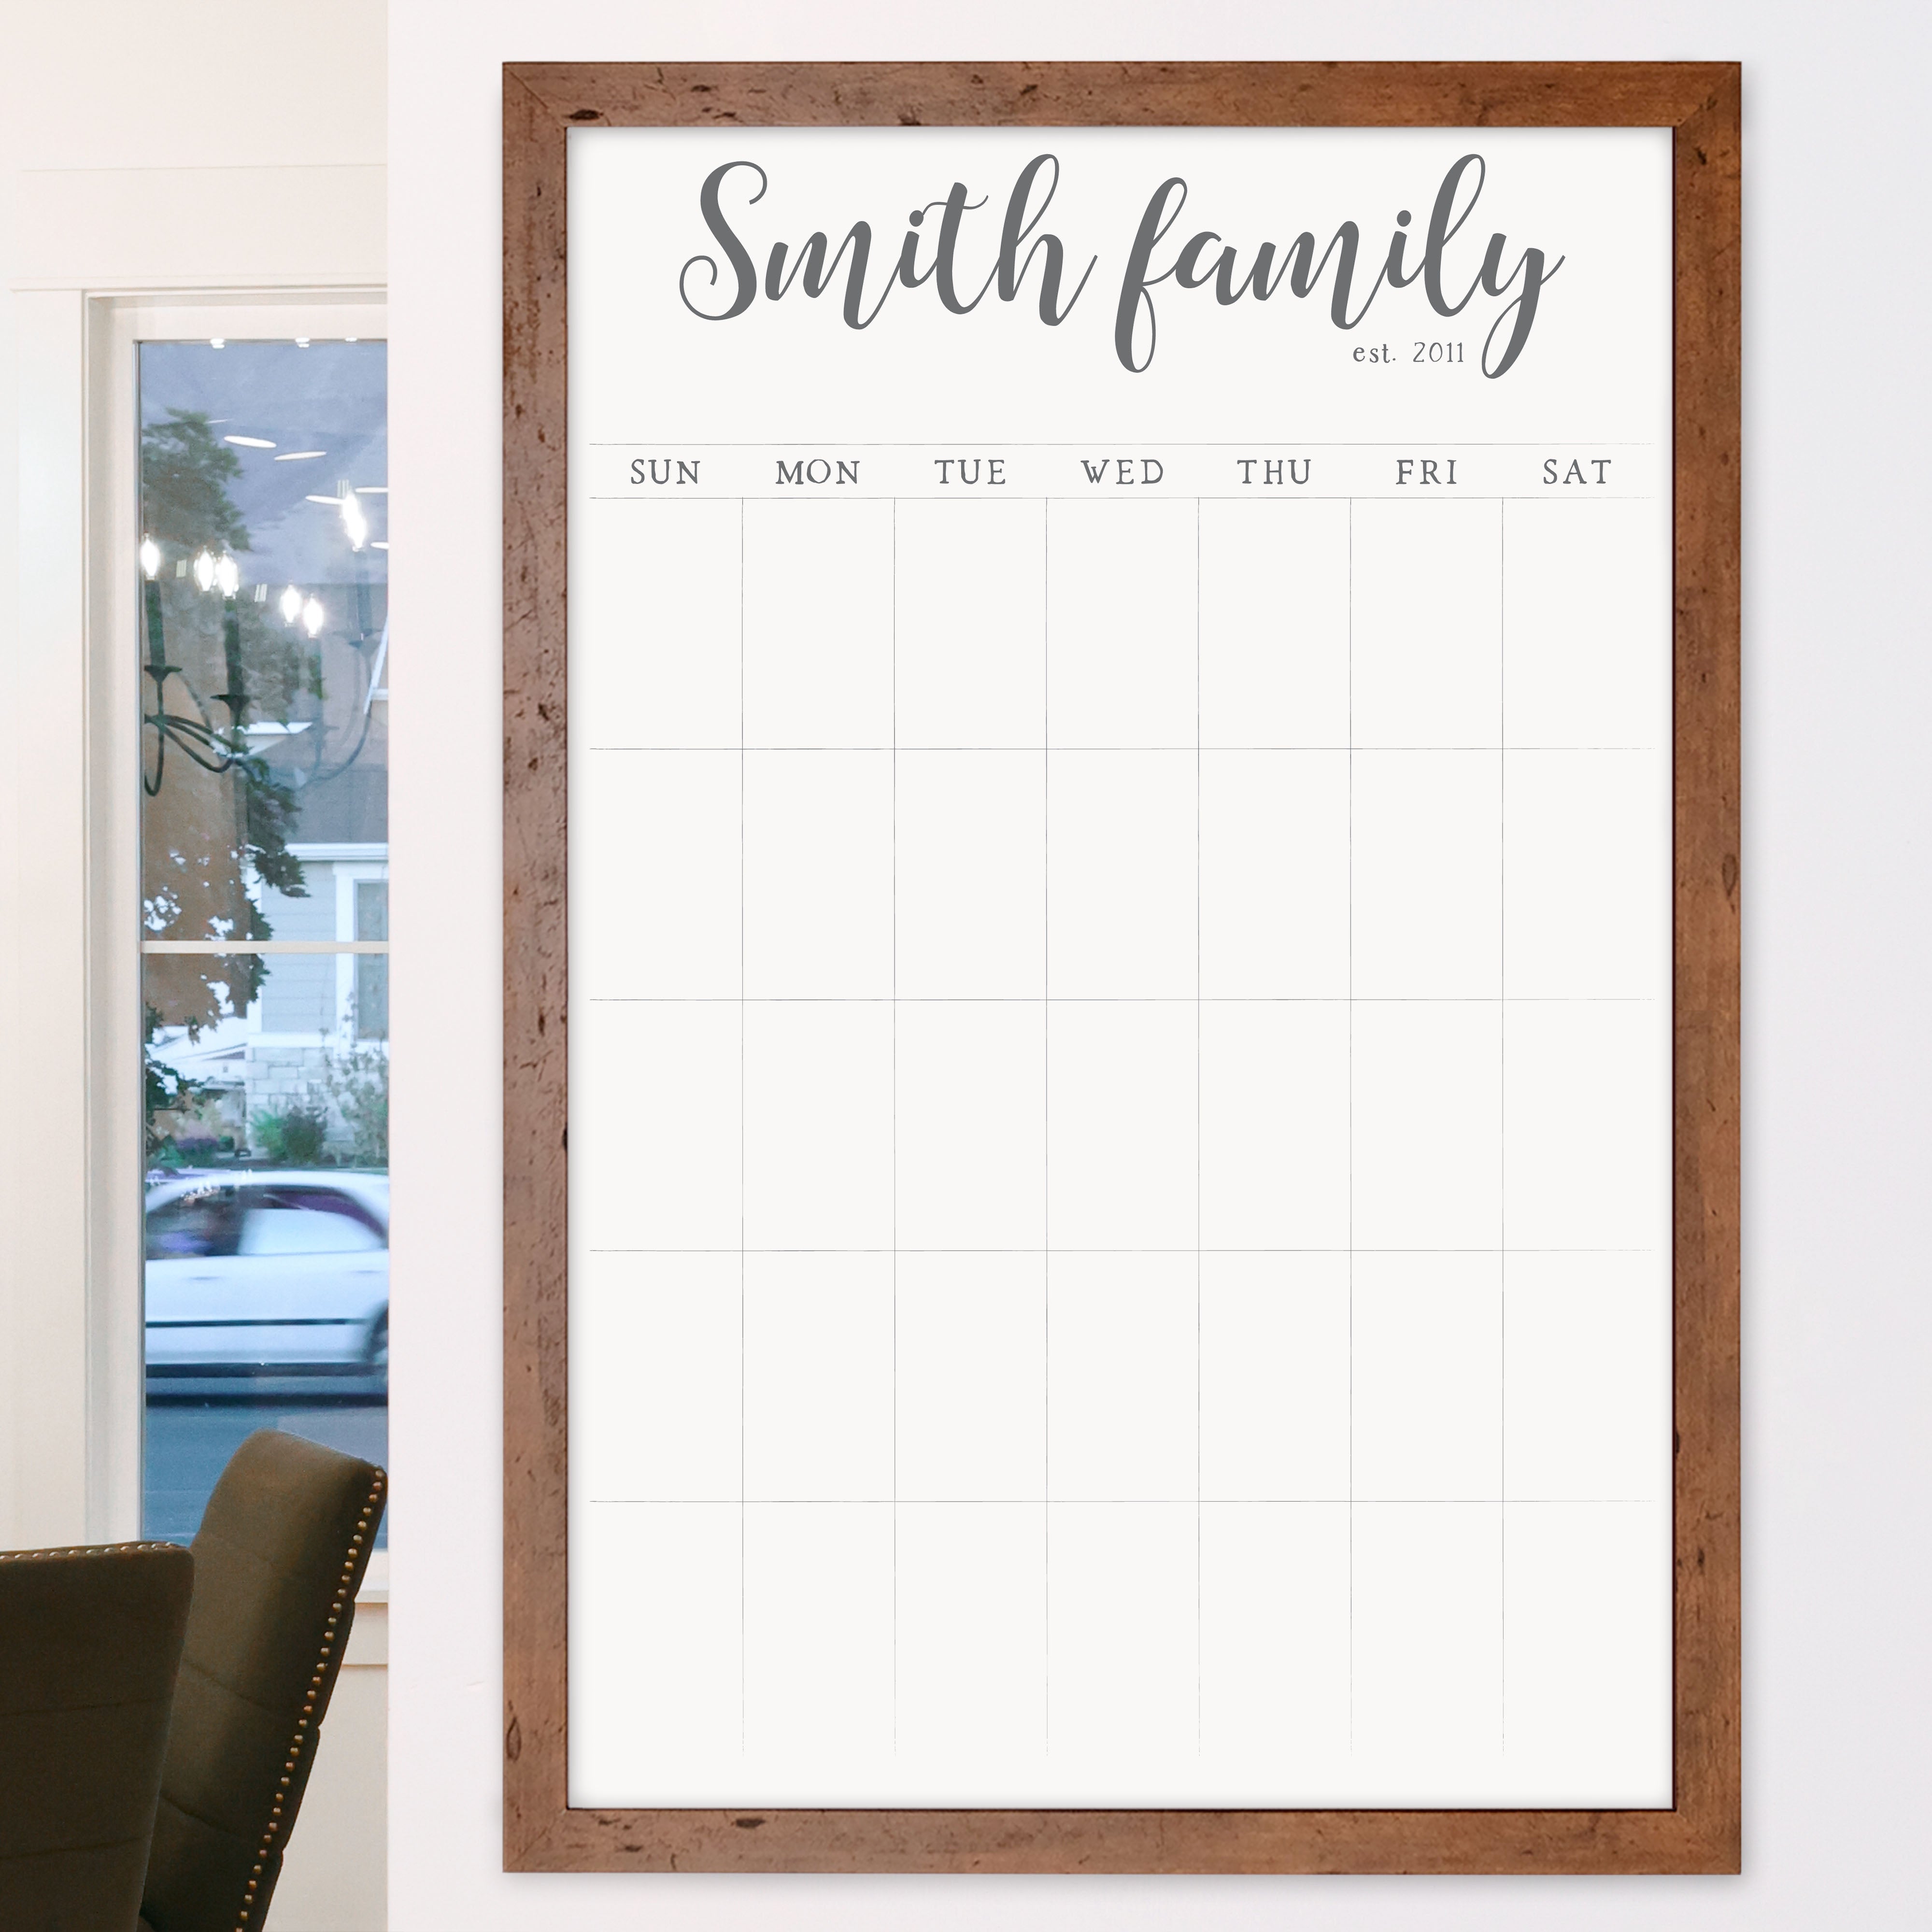 A framed whiteboard monthly calender hanging on the wall